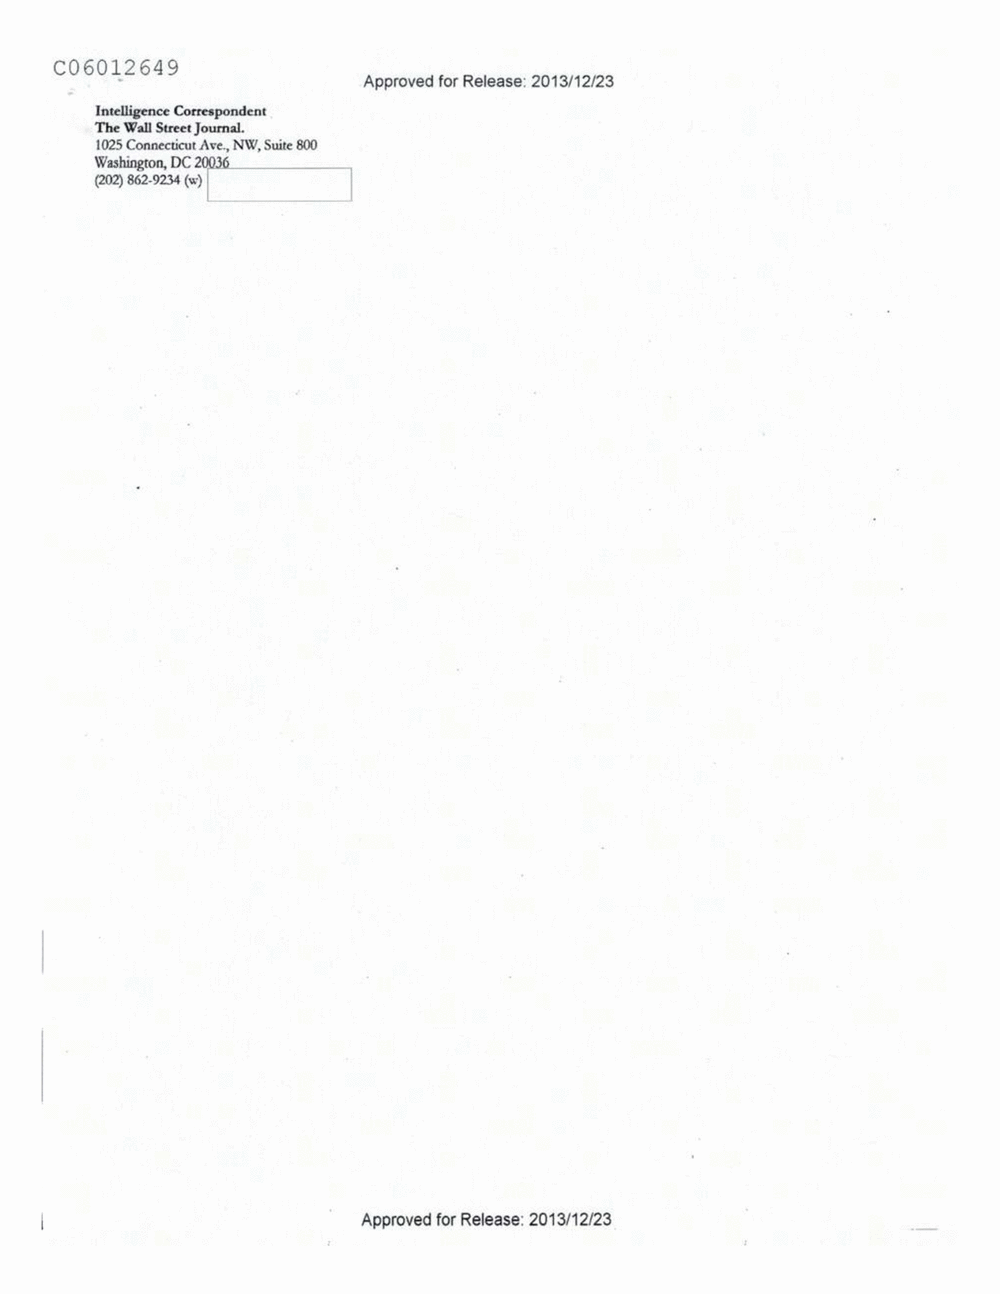 Page 223 from Email Correspondence Between Reporters and CIA Flacks